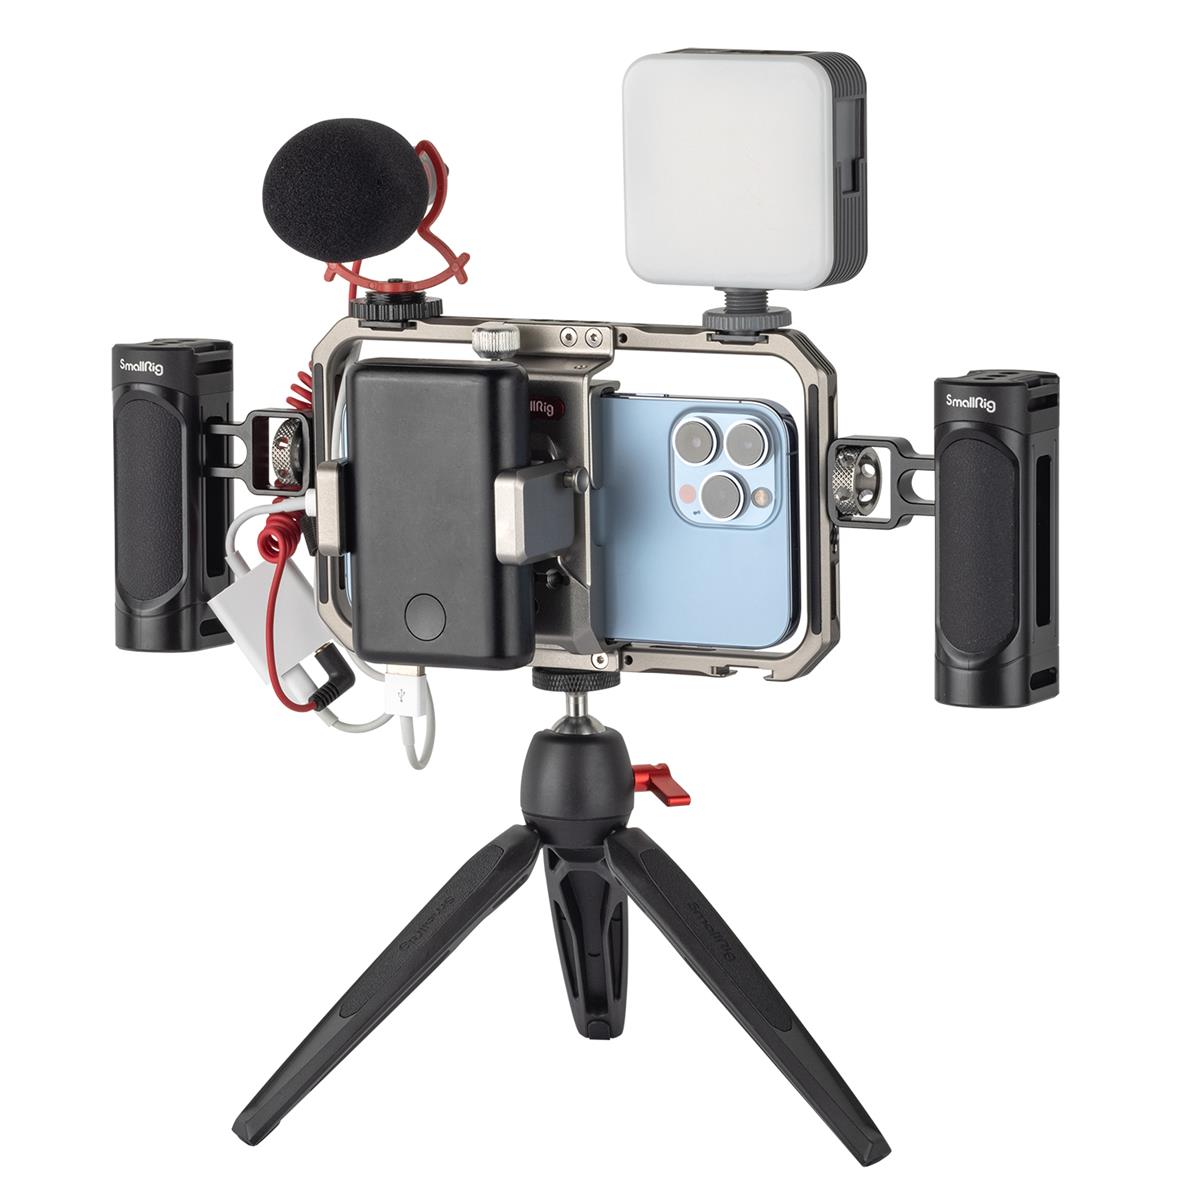 Is SmallRig's Mobile Video Kit the Best iPhone Cage System?